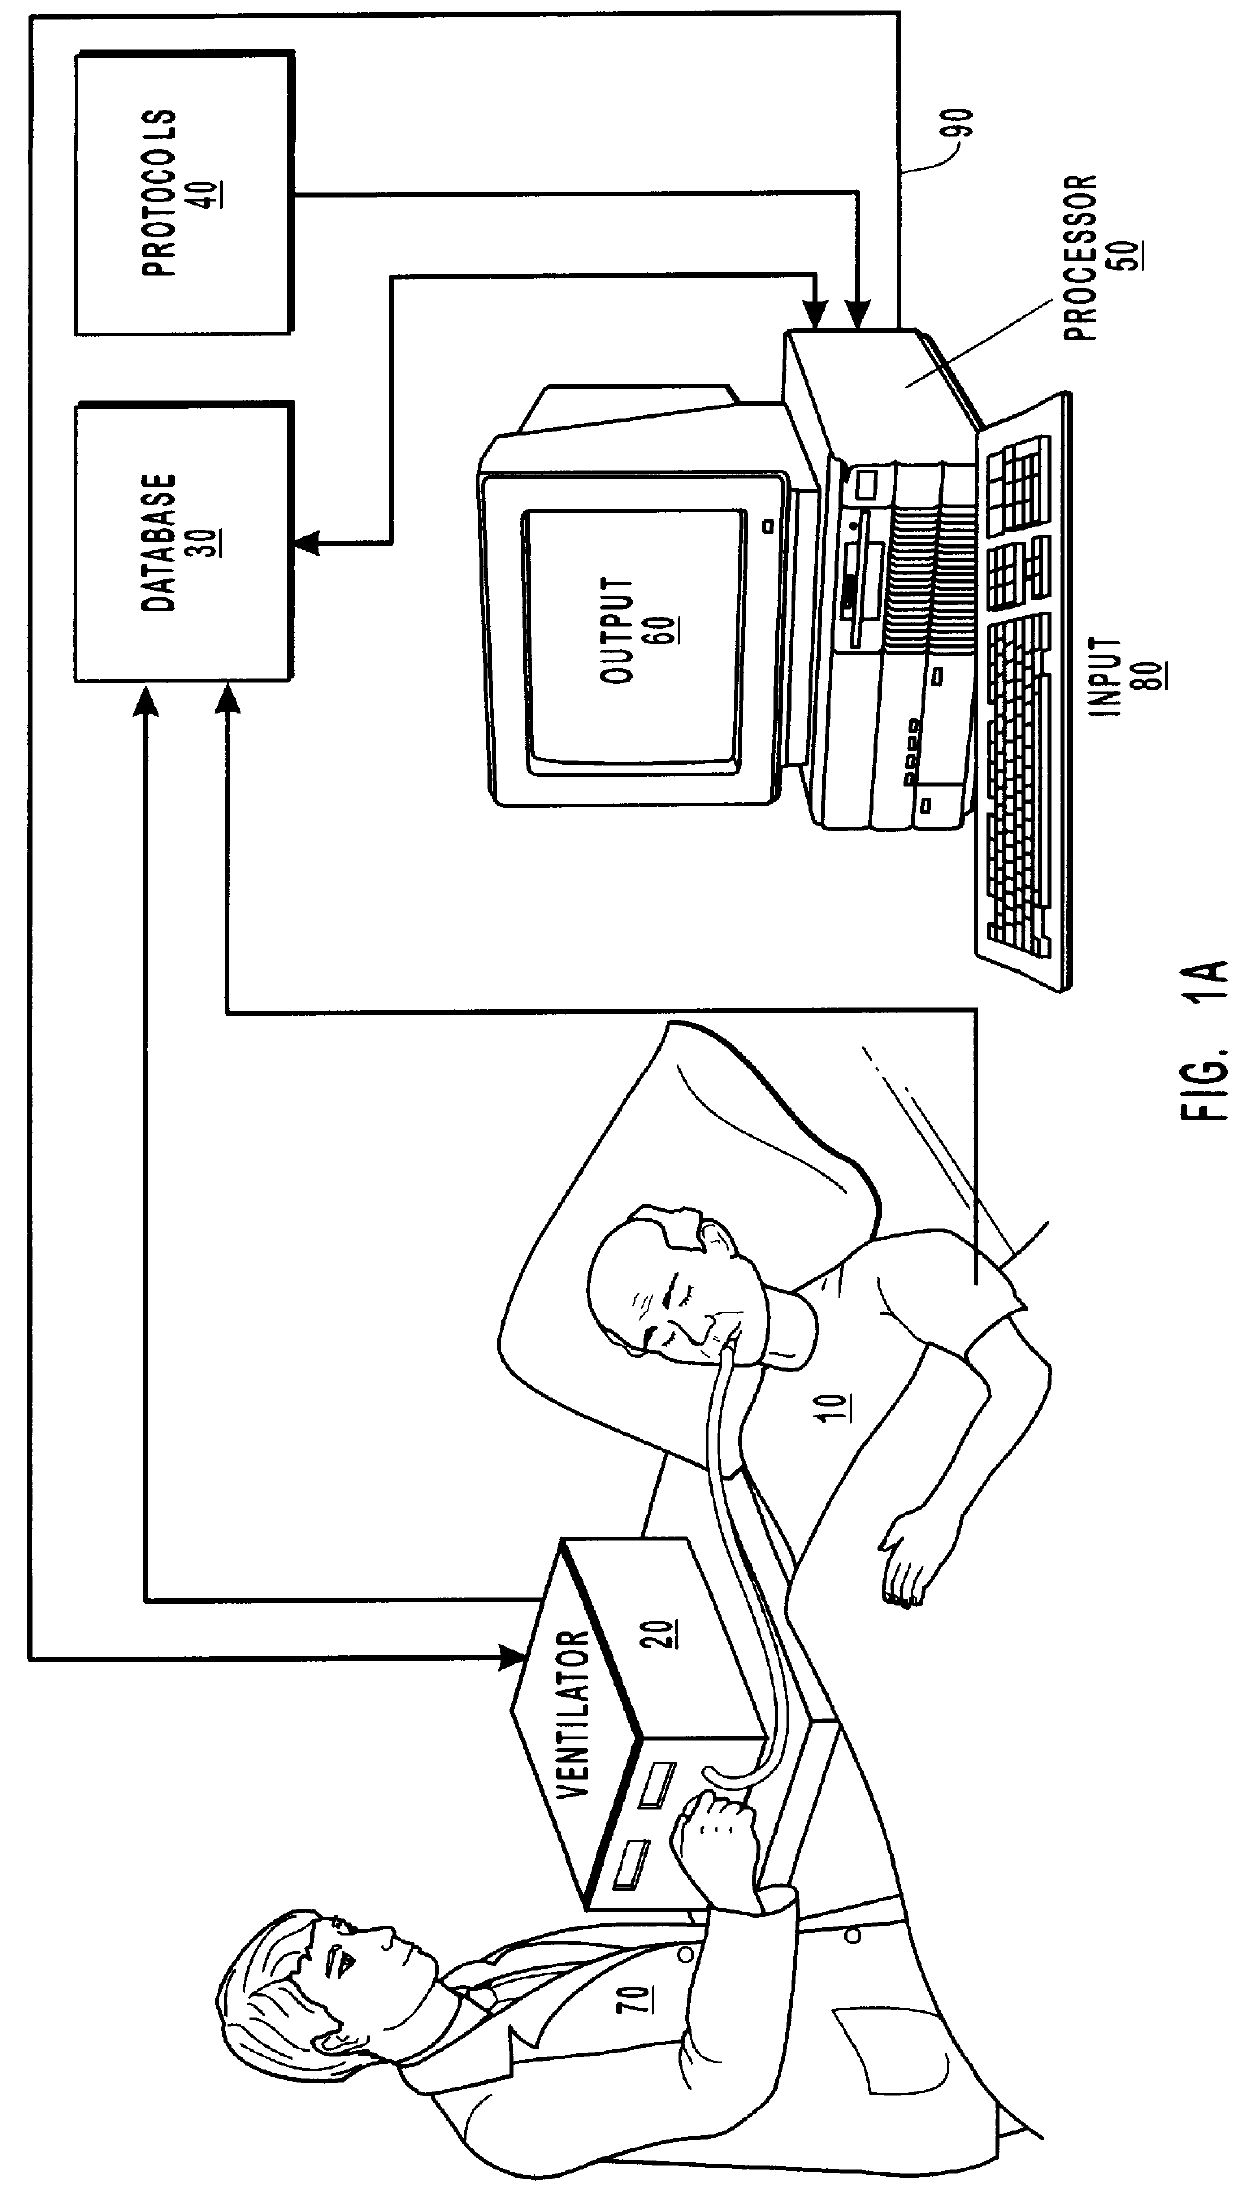 Method and system for patient monitoring and respiratory assistance control through mechanical ventilation by the use of deterministic protocols